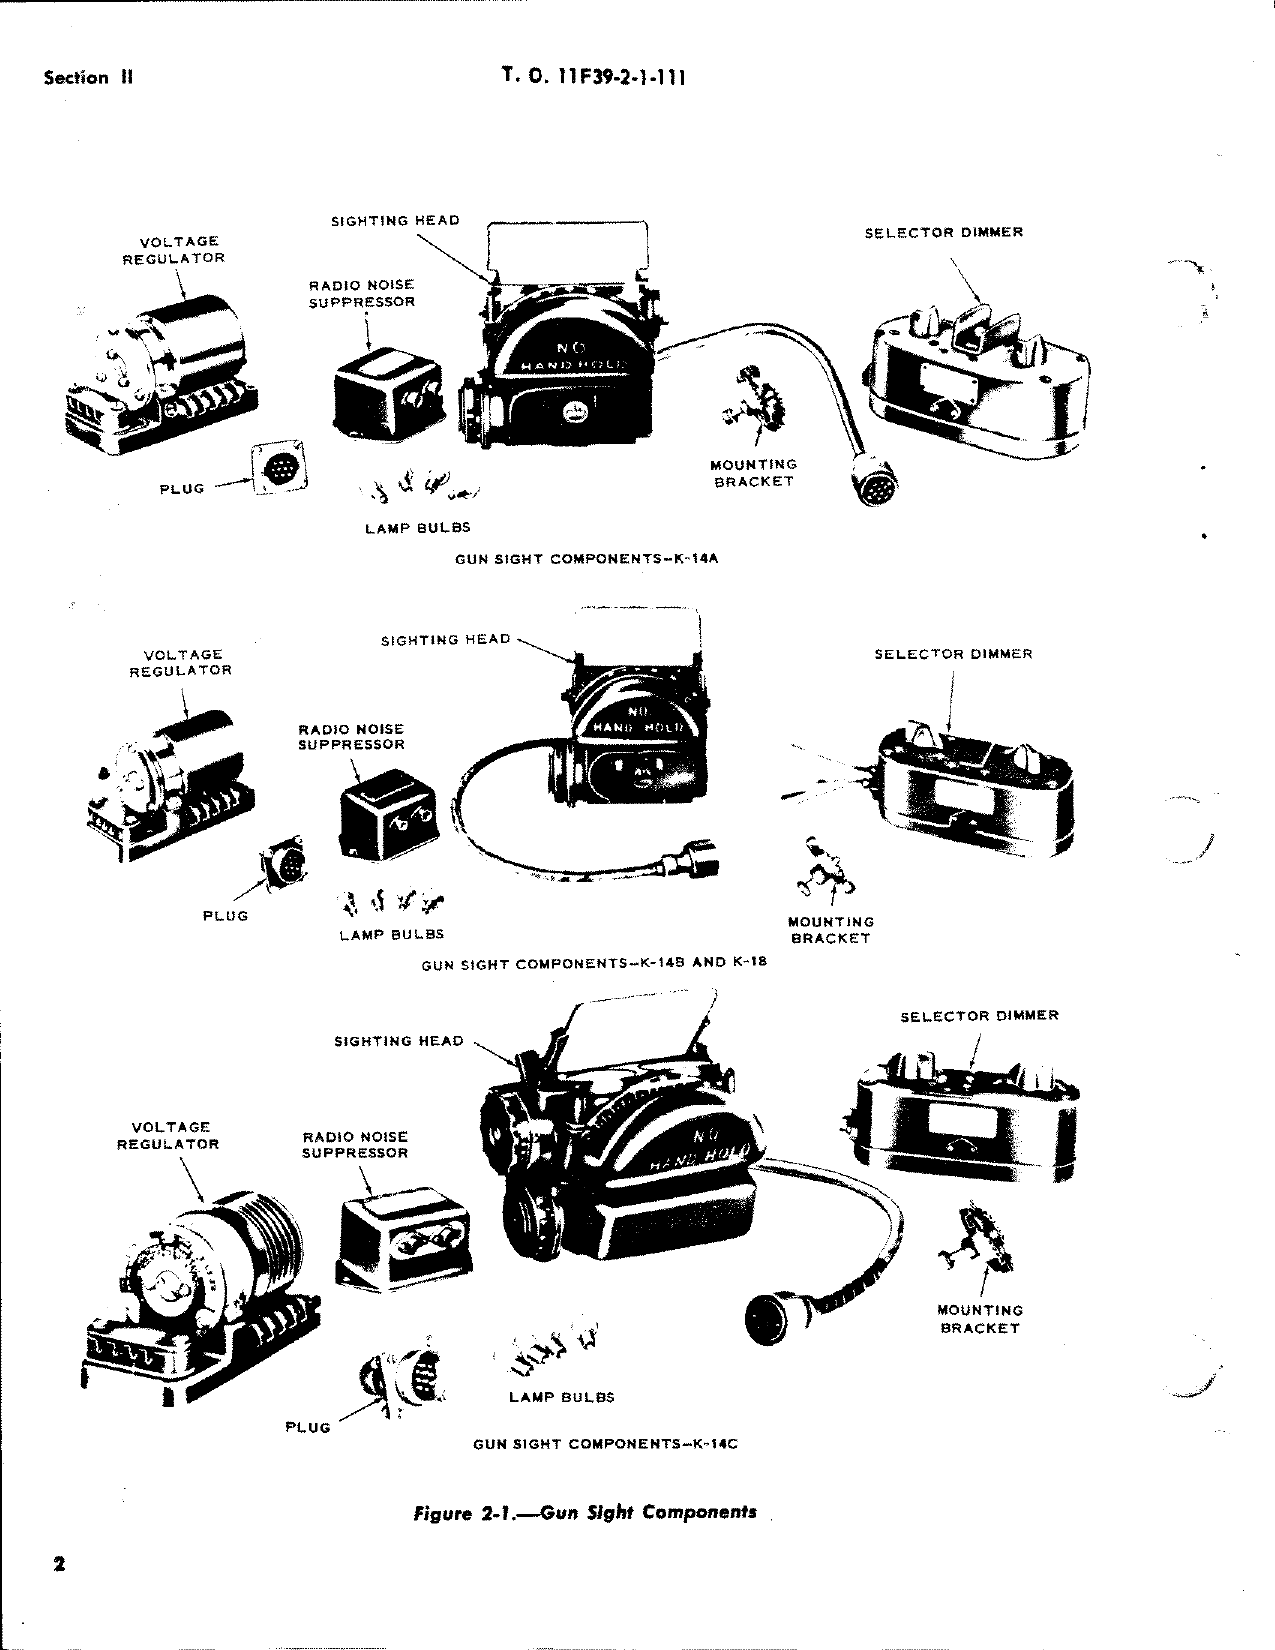 Sample page 5 from AirCorps Library document: Operation, Service, Overhaul with Parts Breakdown for Computing Gun Sights - K-14 and K18 Series 